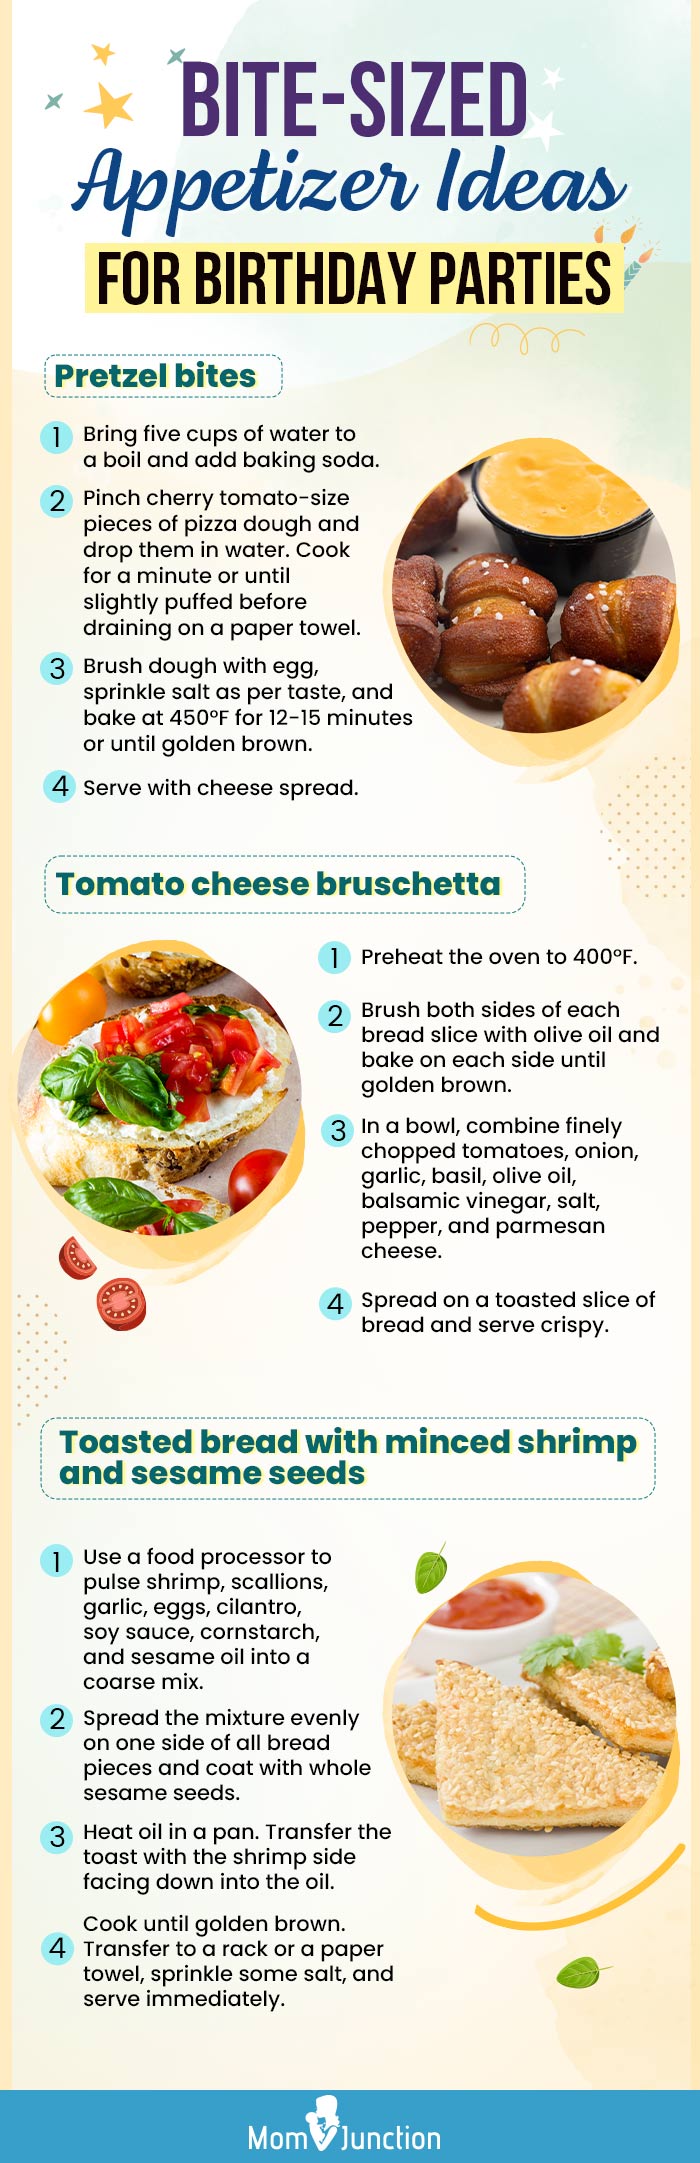 bite sized appetizer ideas for birthday parties [infographic]